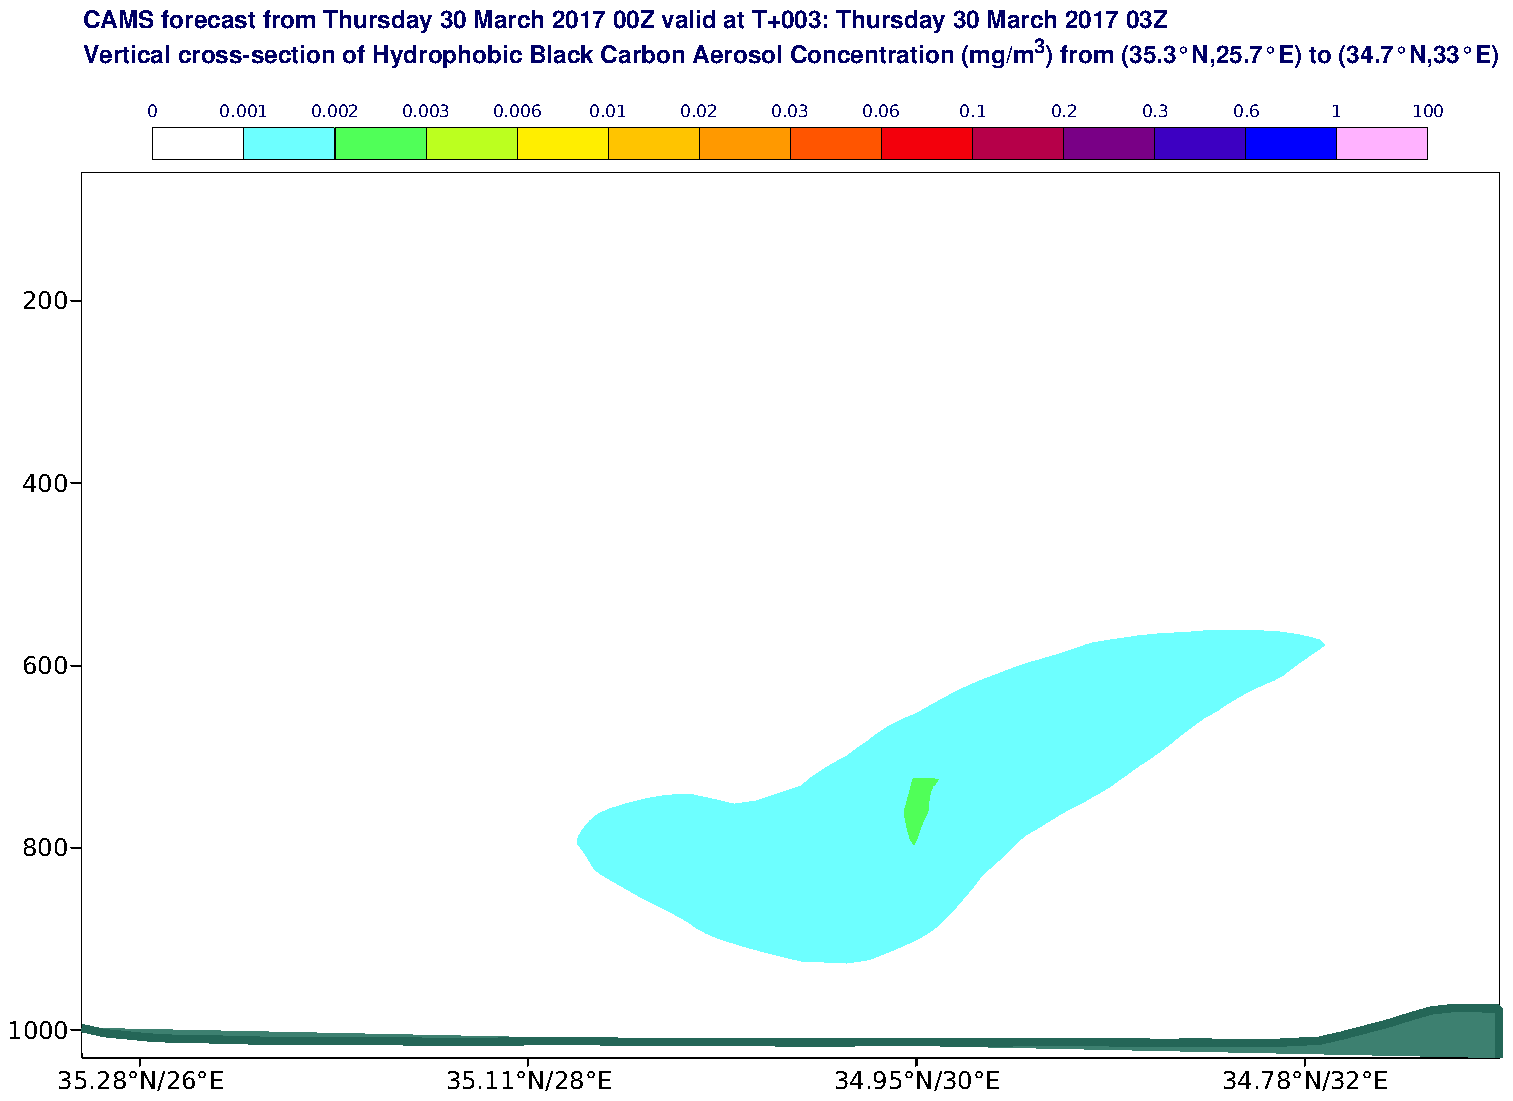 Vertical cross-section of Hydrophobic Black Carbon Aerosol Concentration (mg/m3) valid at T3 - 2017-03-30 03:00